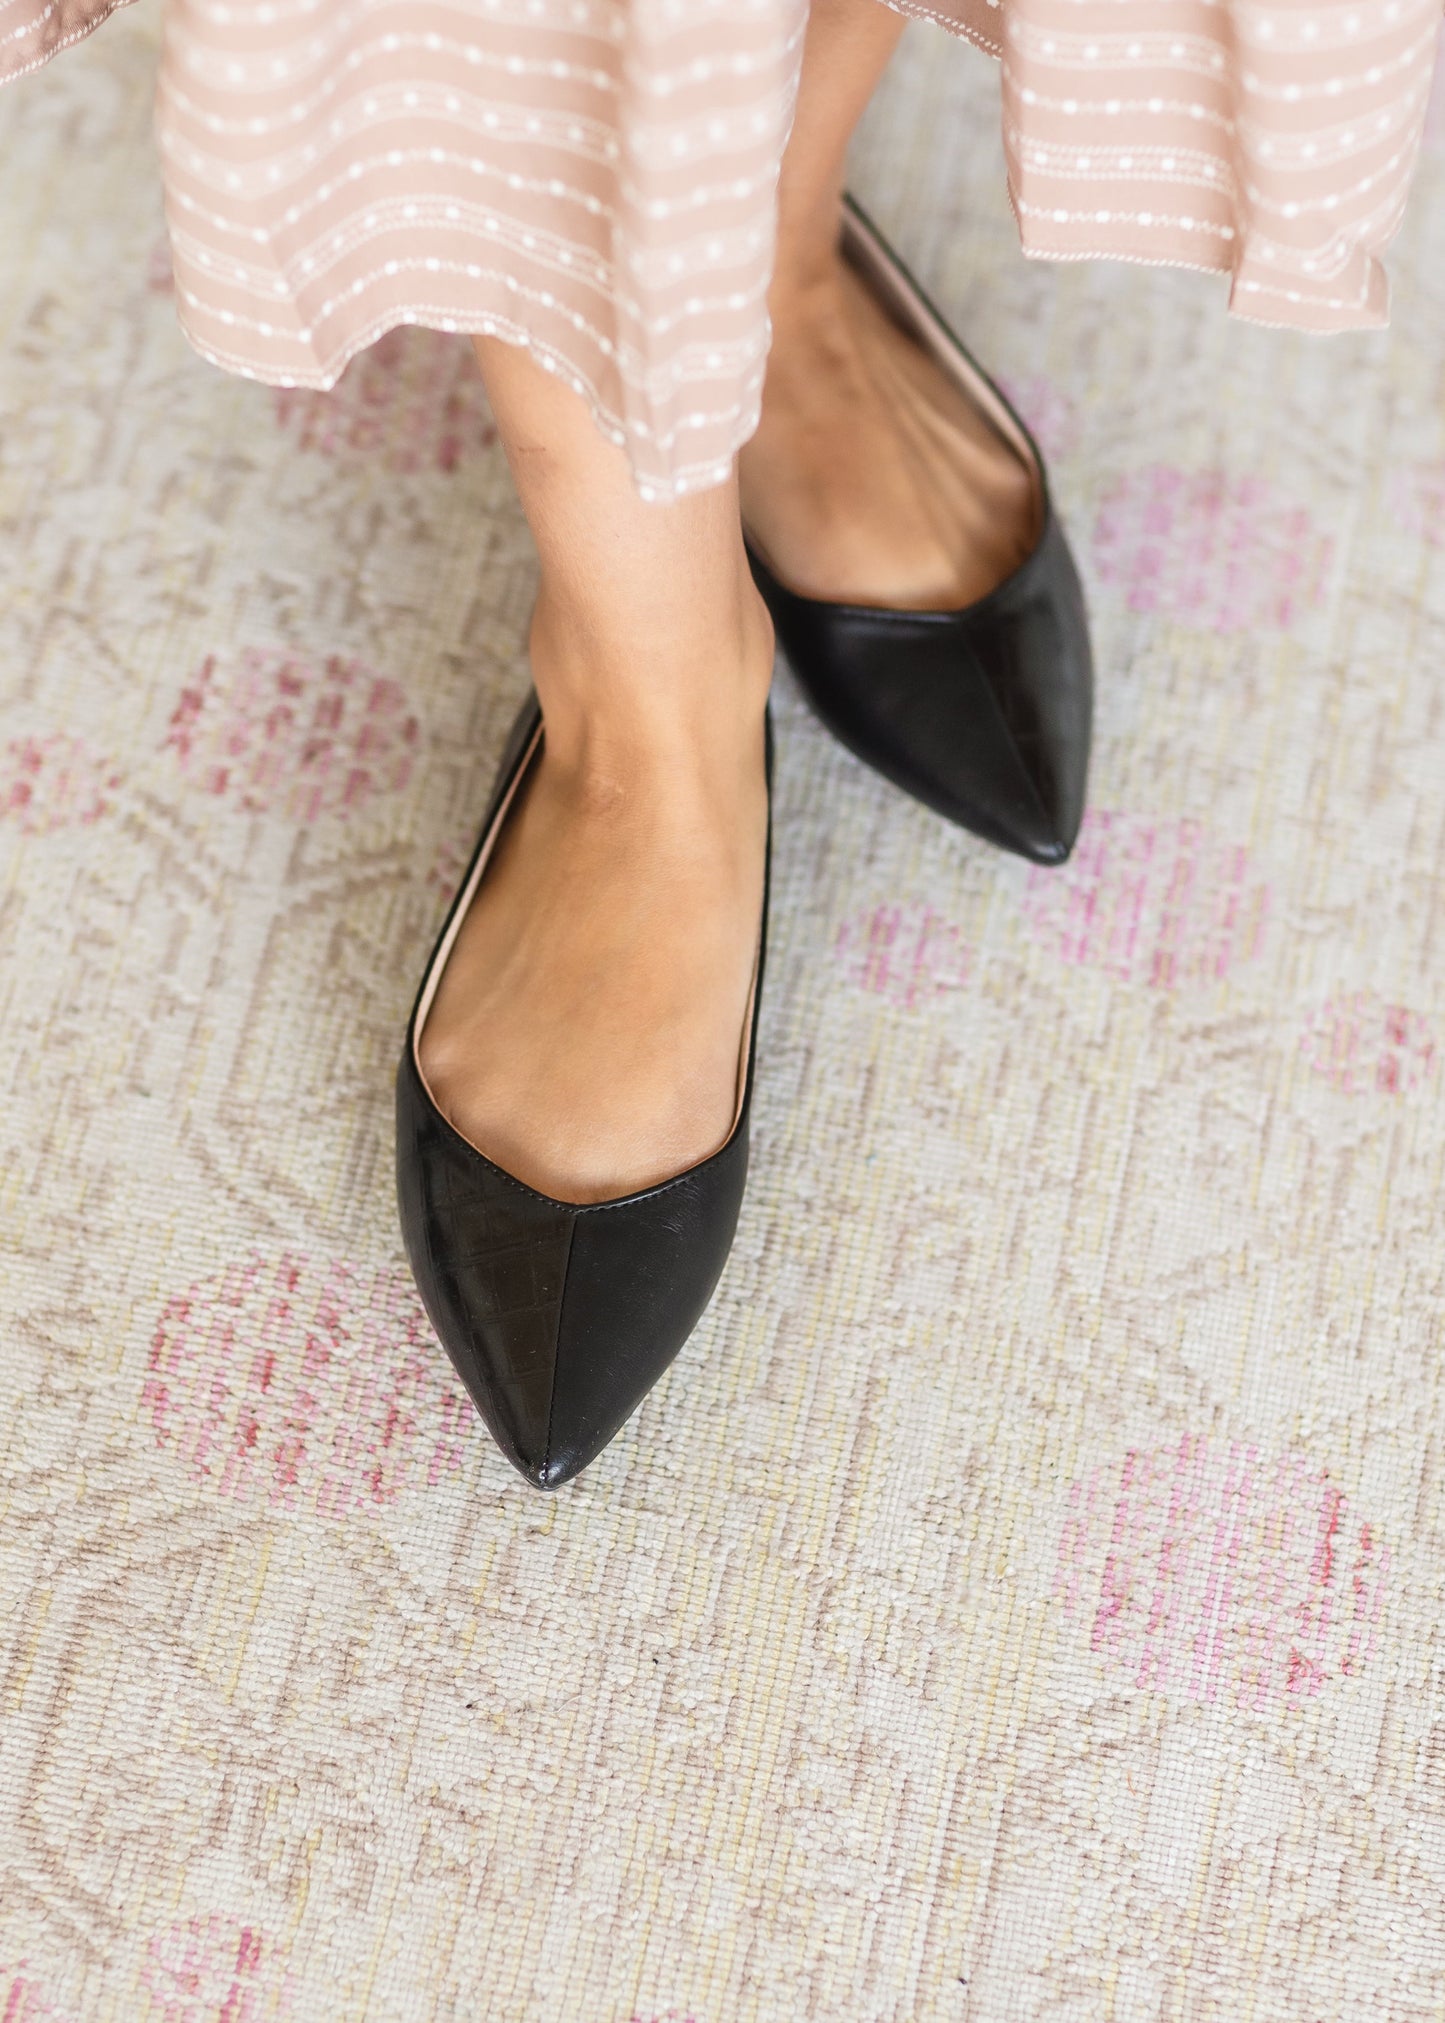 Duo Print Black Pointed Flat - FINAL SALE Shoes